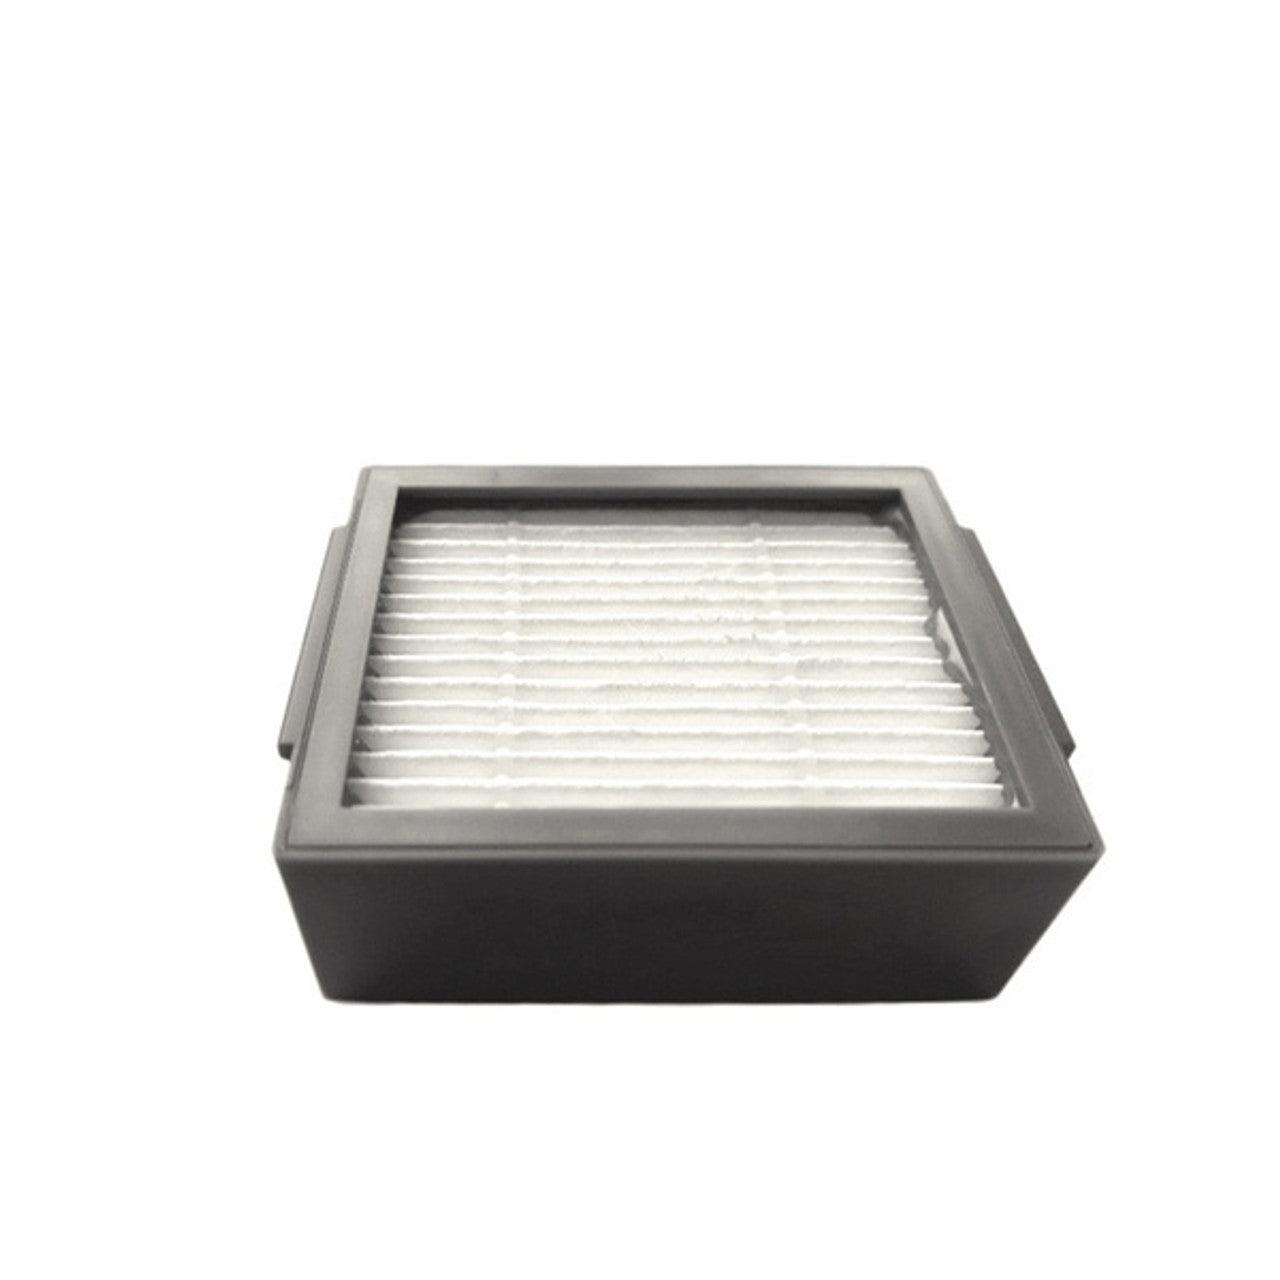 Buy 1 X HEPA filter for iRobot Roomba I, E and J series robots discounted | Products On Sale Australia